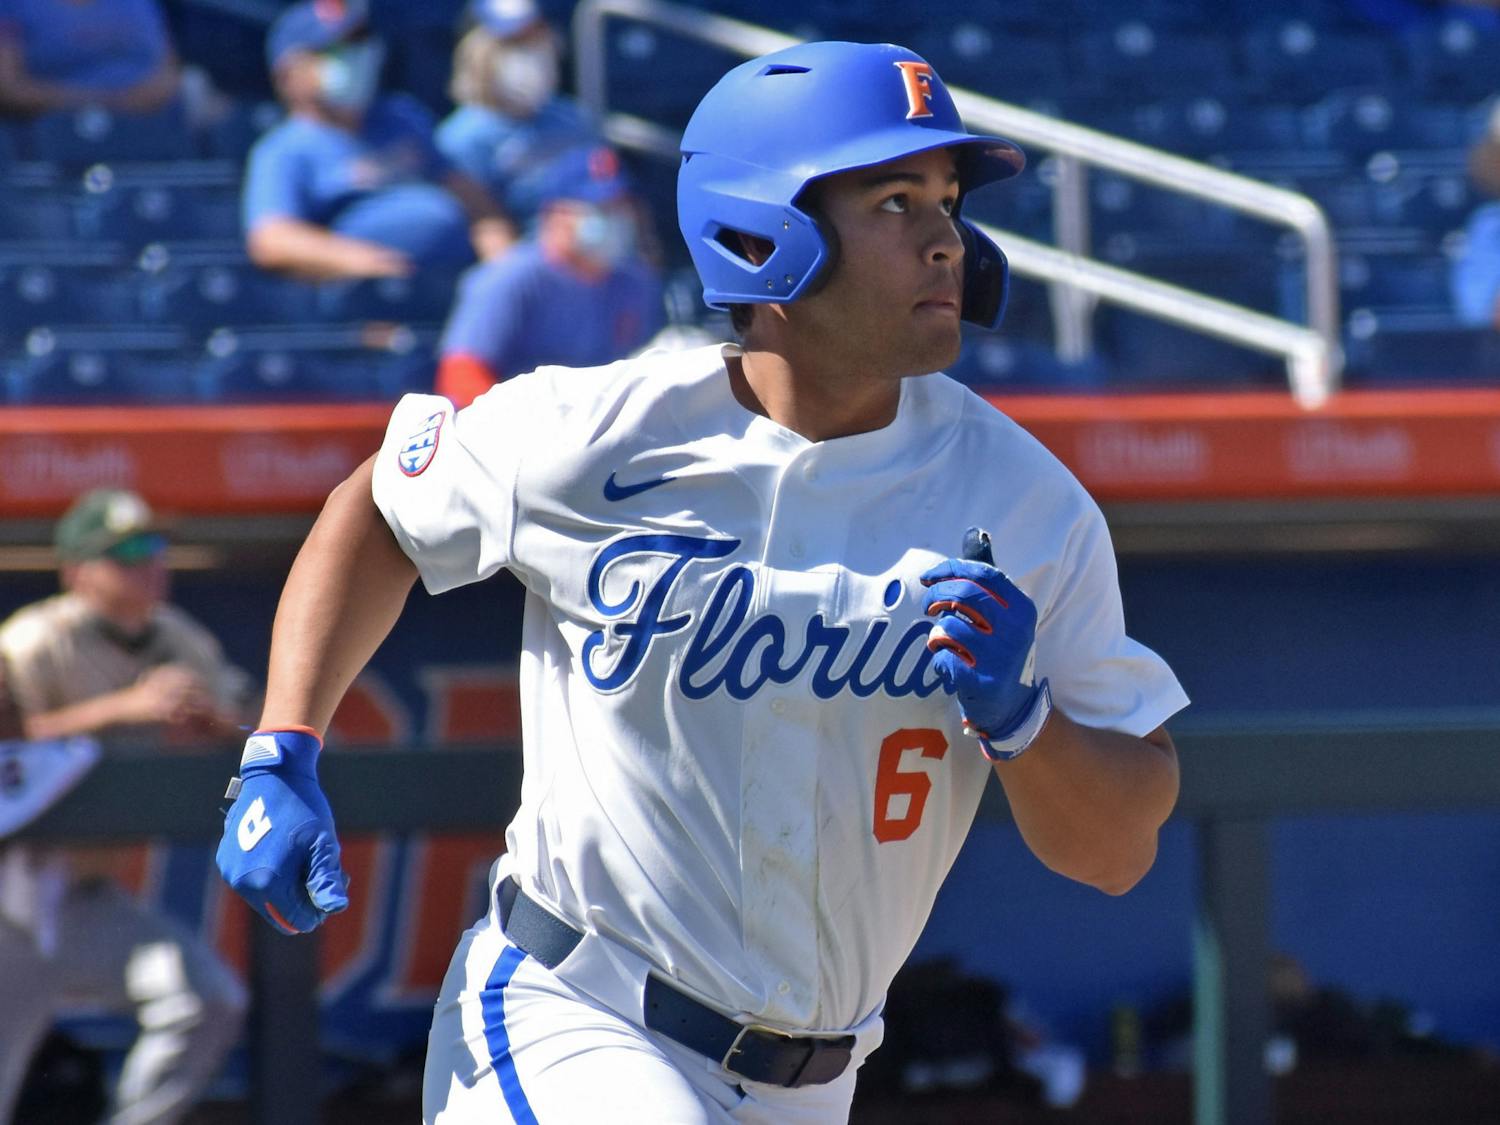 Calilao’s heroics ended a 3-2 pitching battle and lifted Florida over their in-state rival to move to 22-11 on the year. Photo from UF-Jacksonville March 14, 2021.